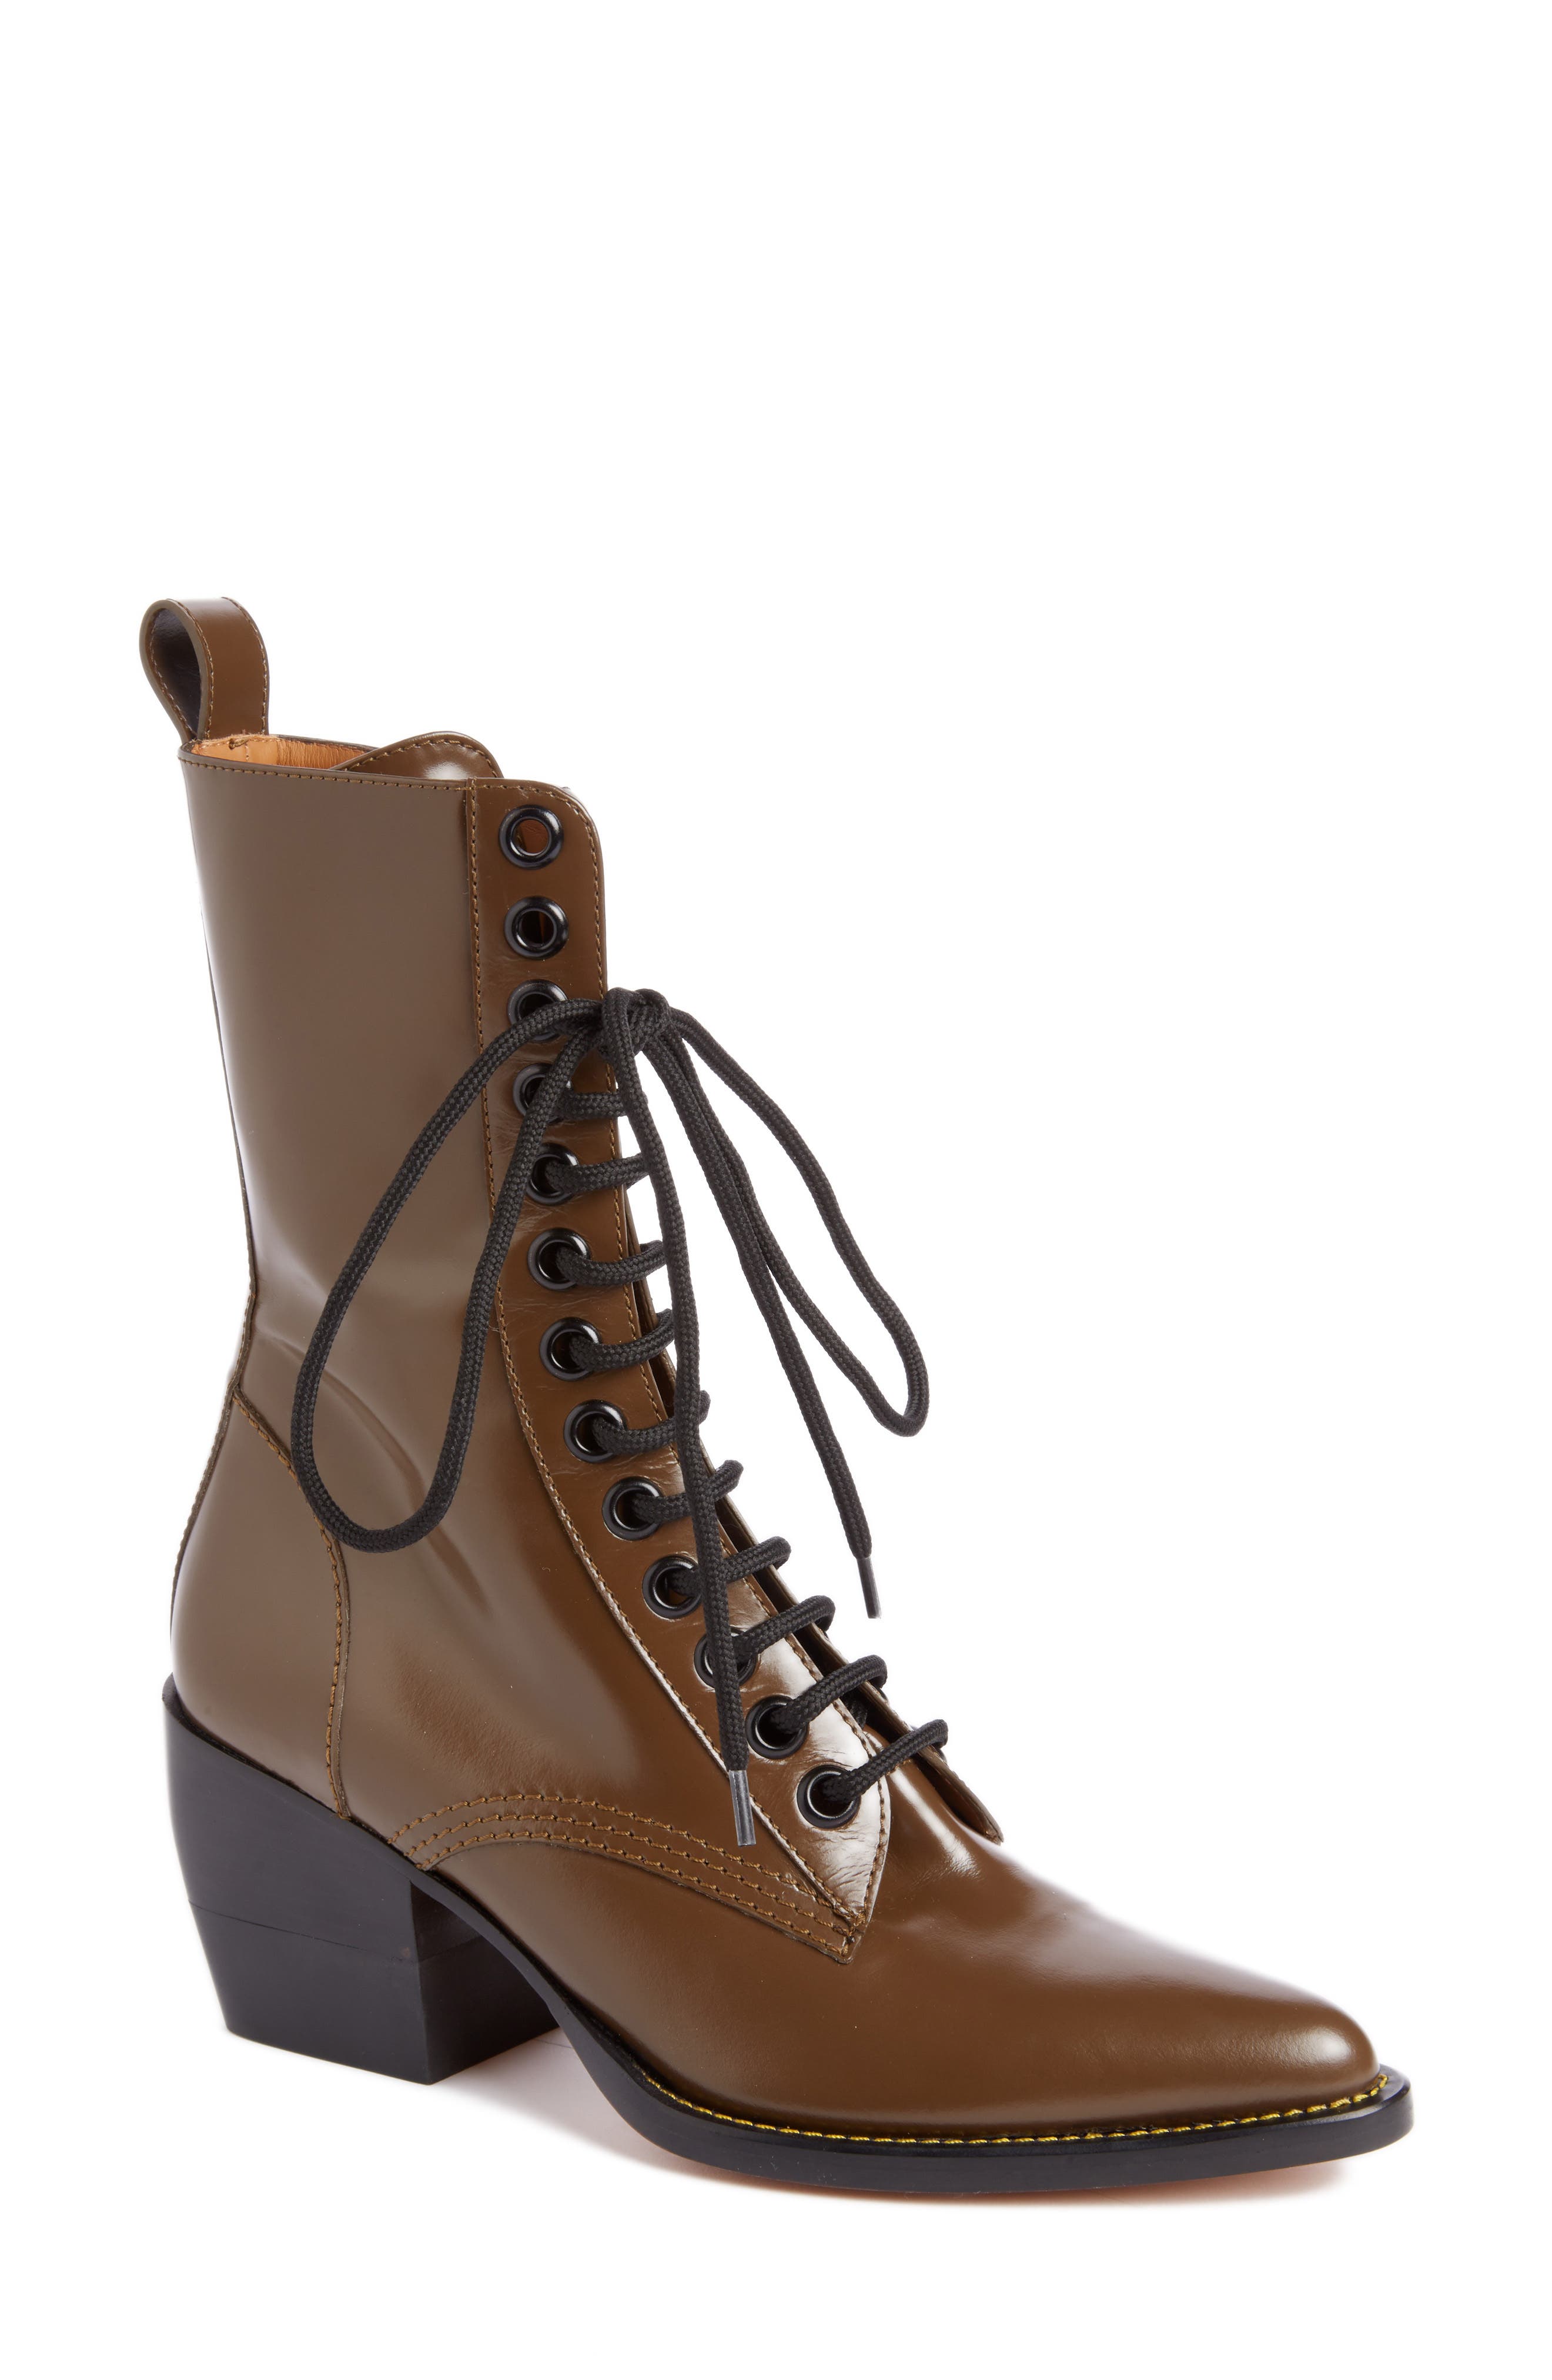 chloe rylee lace up boot